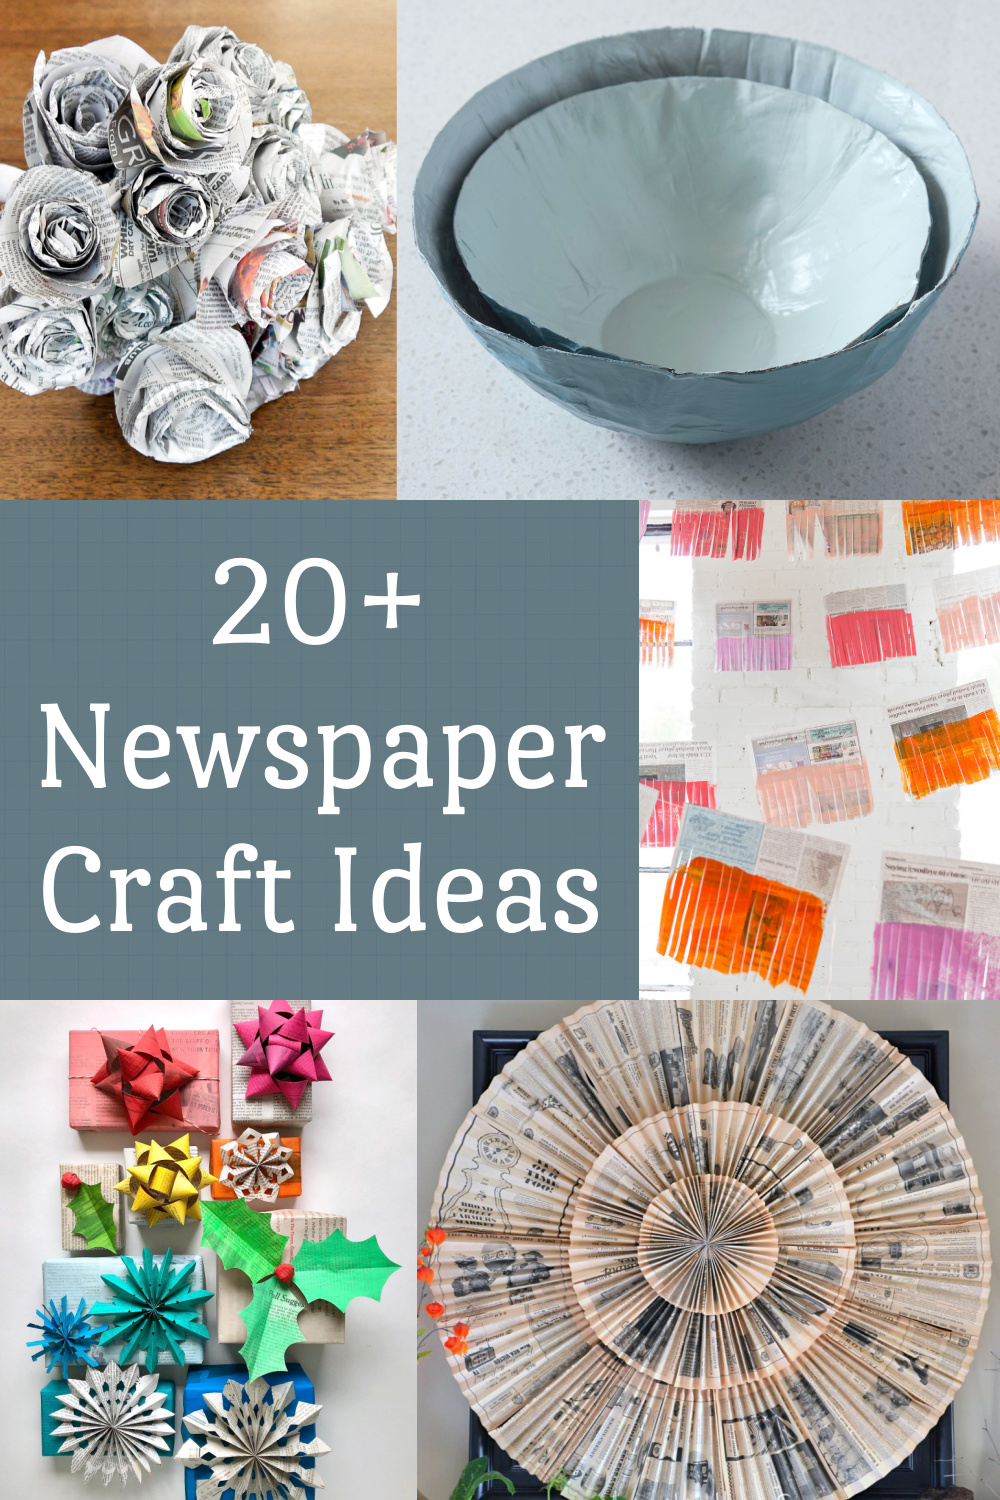 Crafts with Newspaper